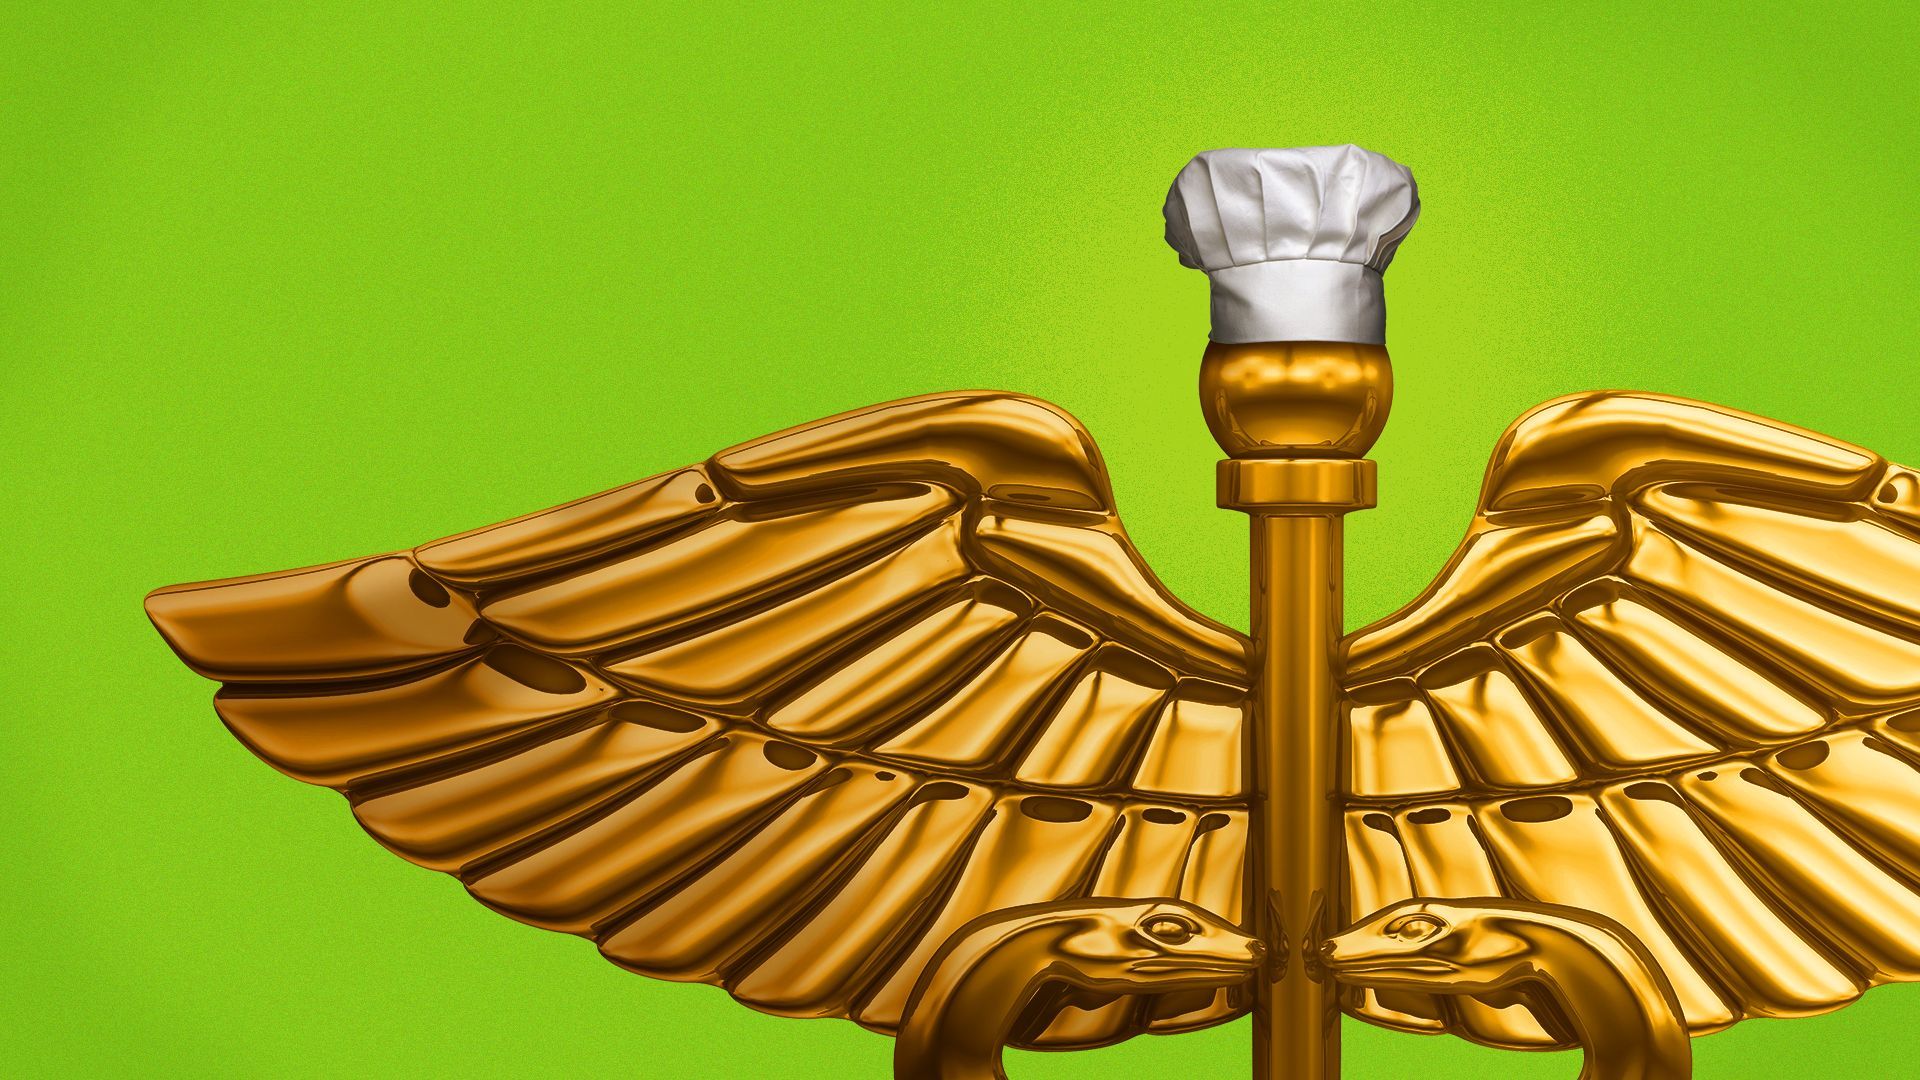 Illustration of a caduceus wearing a chef hap.